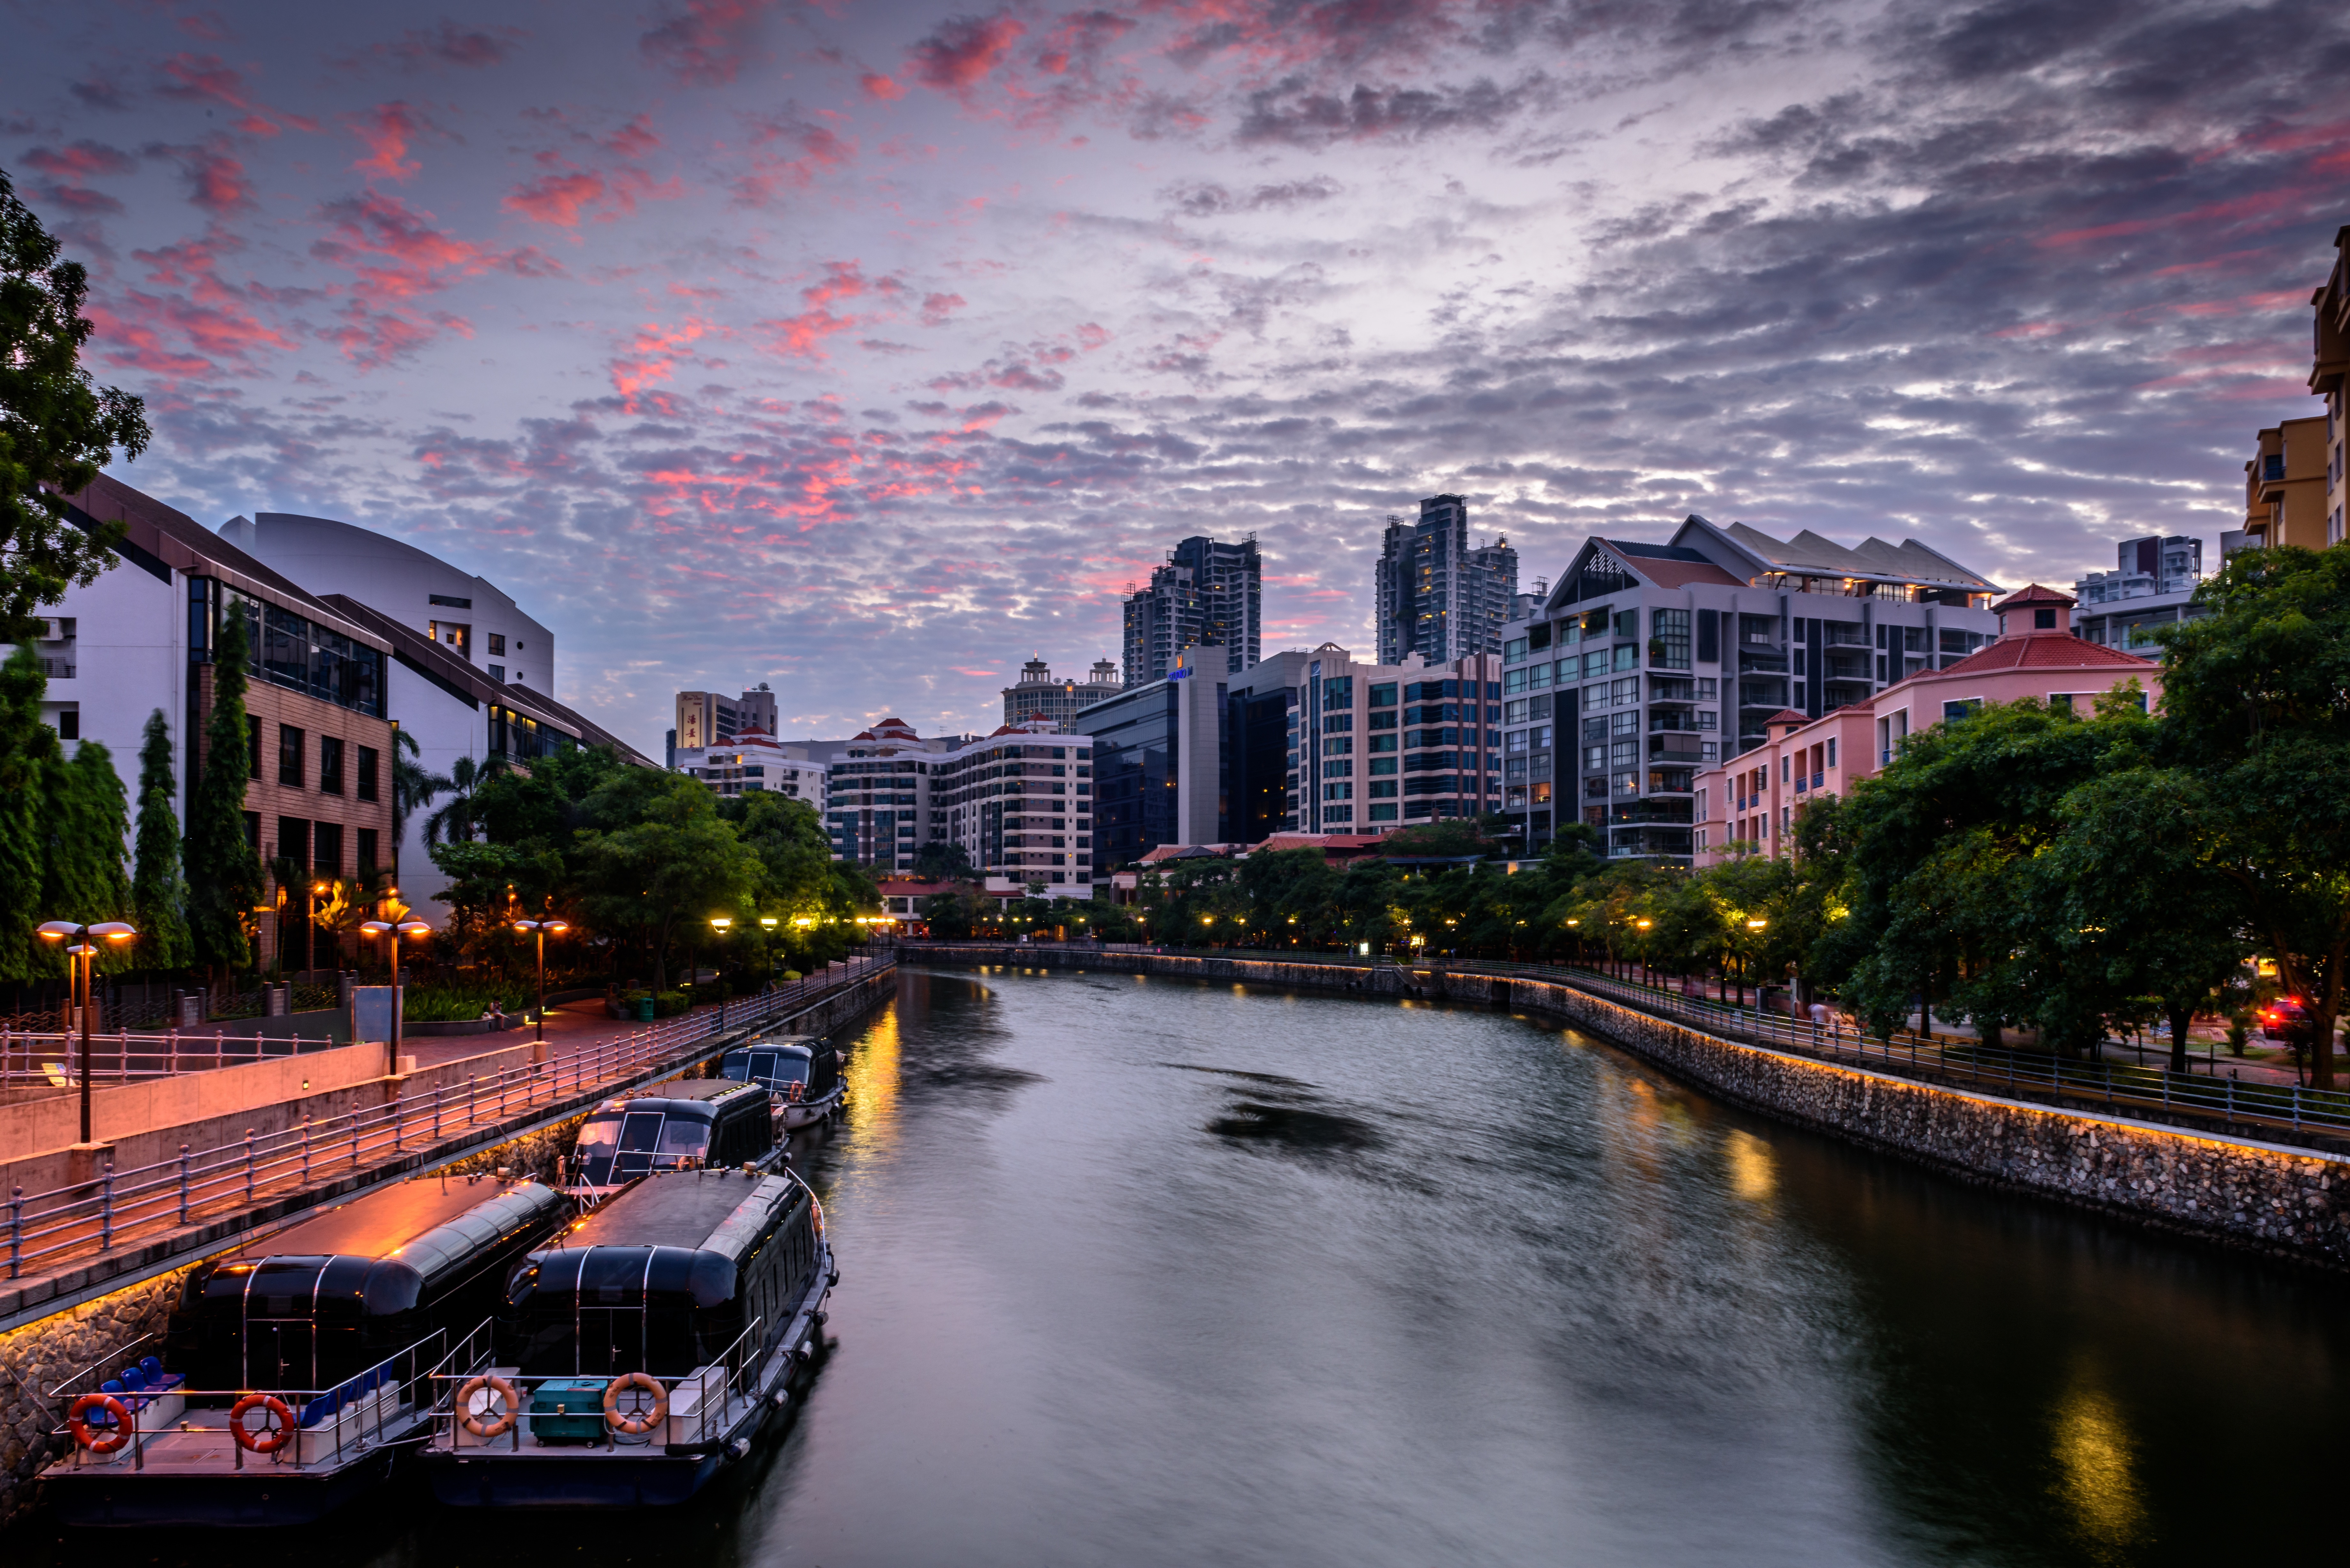 clouds, sky, canal, boat, architecture, city